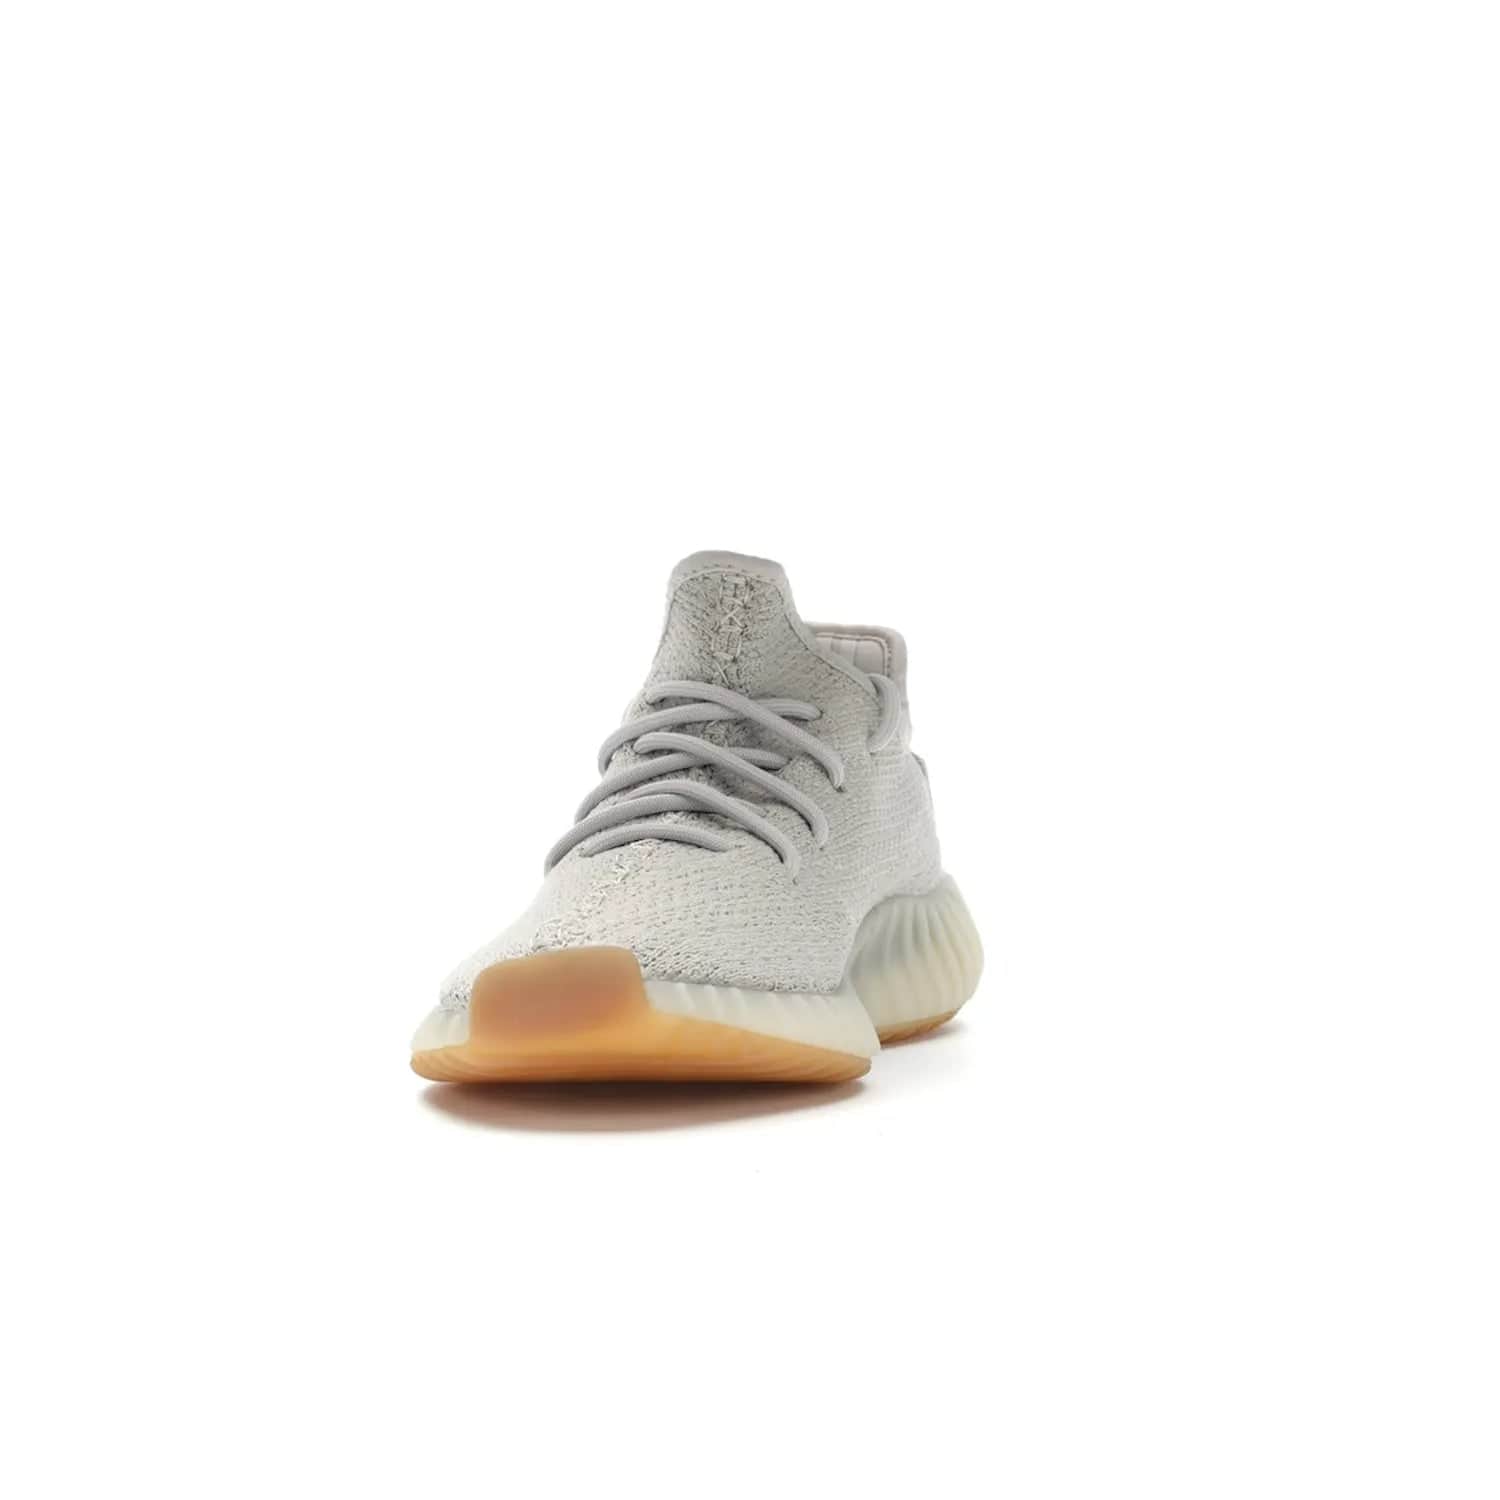 adidas Yeezy Boost 350 V2 Sesame - Image 12 - Only at www.BallersClubKickz.com - Introducing the adidas Yeezy Boost 350 V2 Sesame. Featuring a sesame upper, midsole and gum sole for a sleek silhouette. Cop the stylish sneaker released in November 2018.